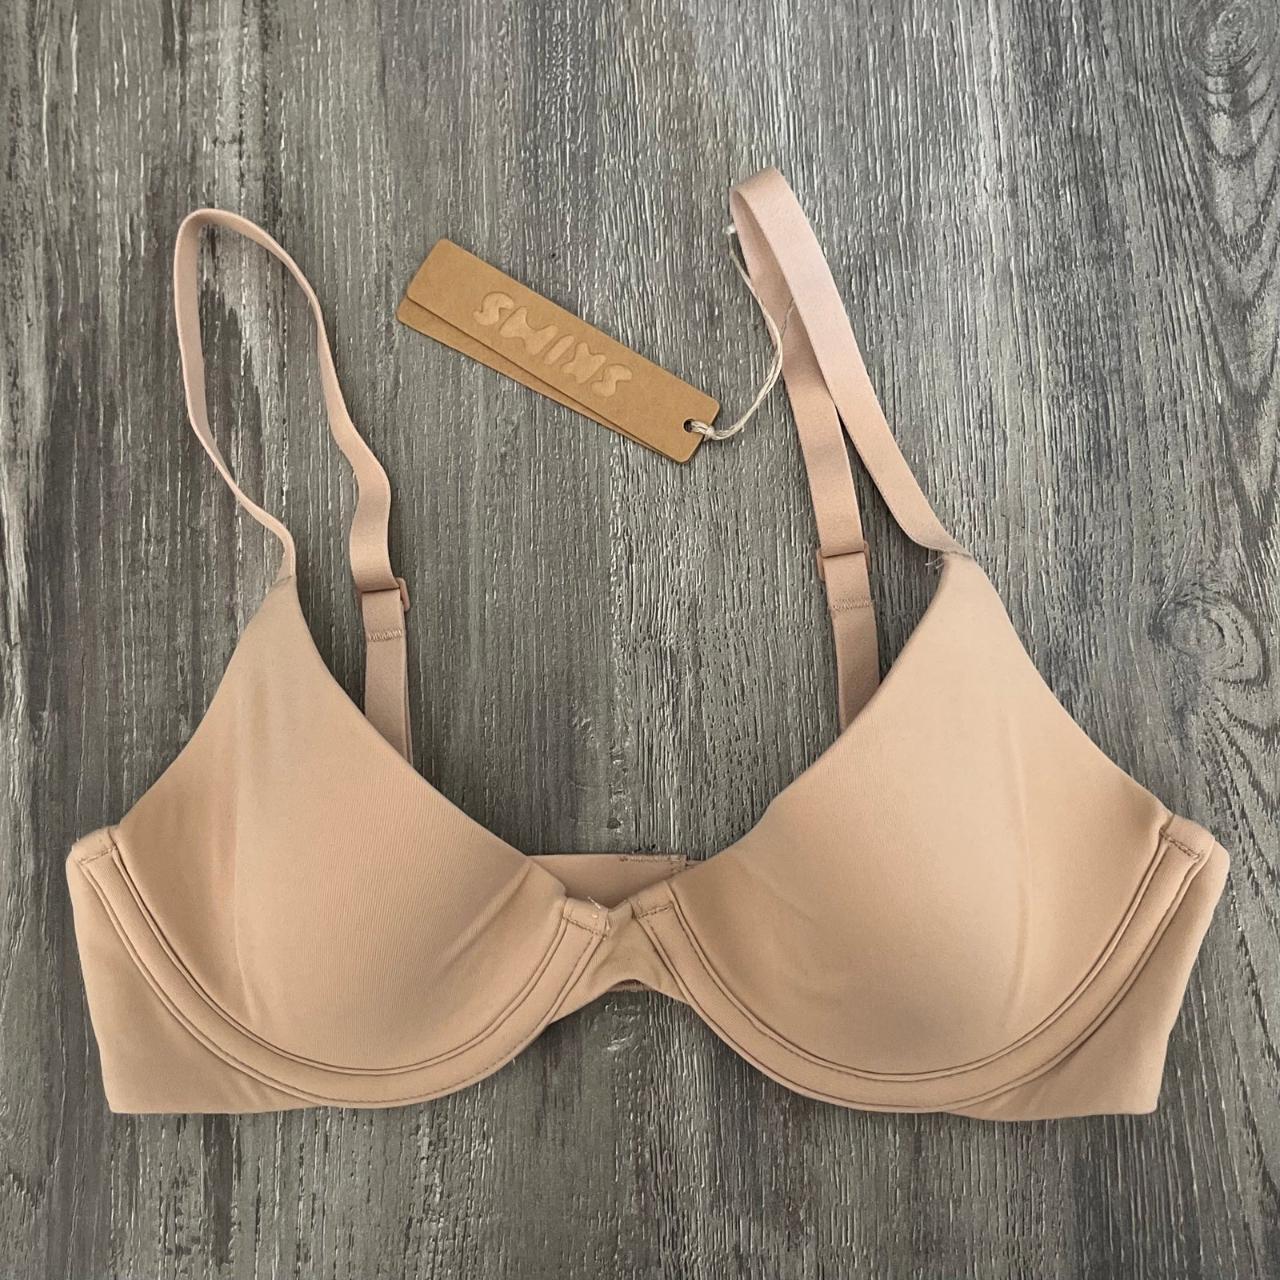 Skims Fits Everybody Plunge Bra 36C in Oxide, Women's Fashion, New  Undergarments & Loungewear on Carousell